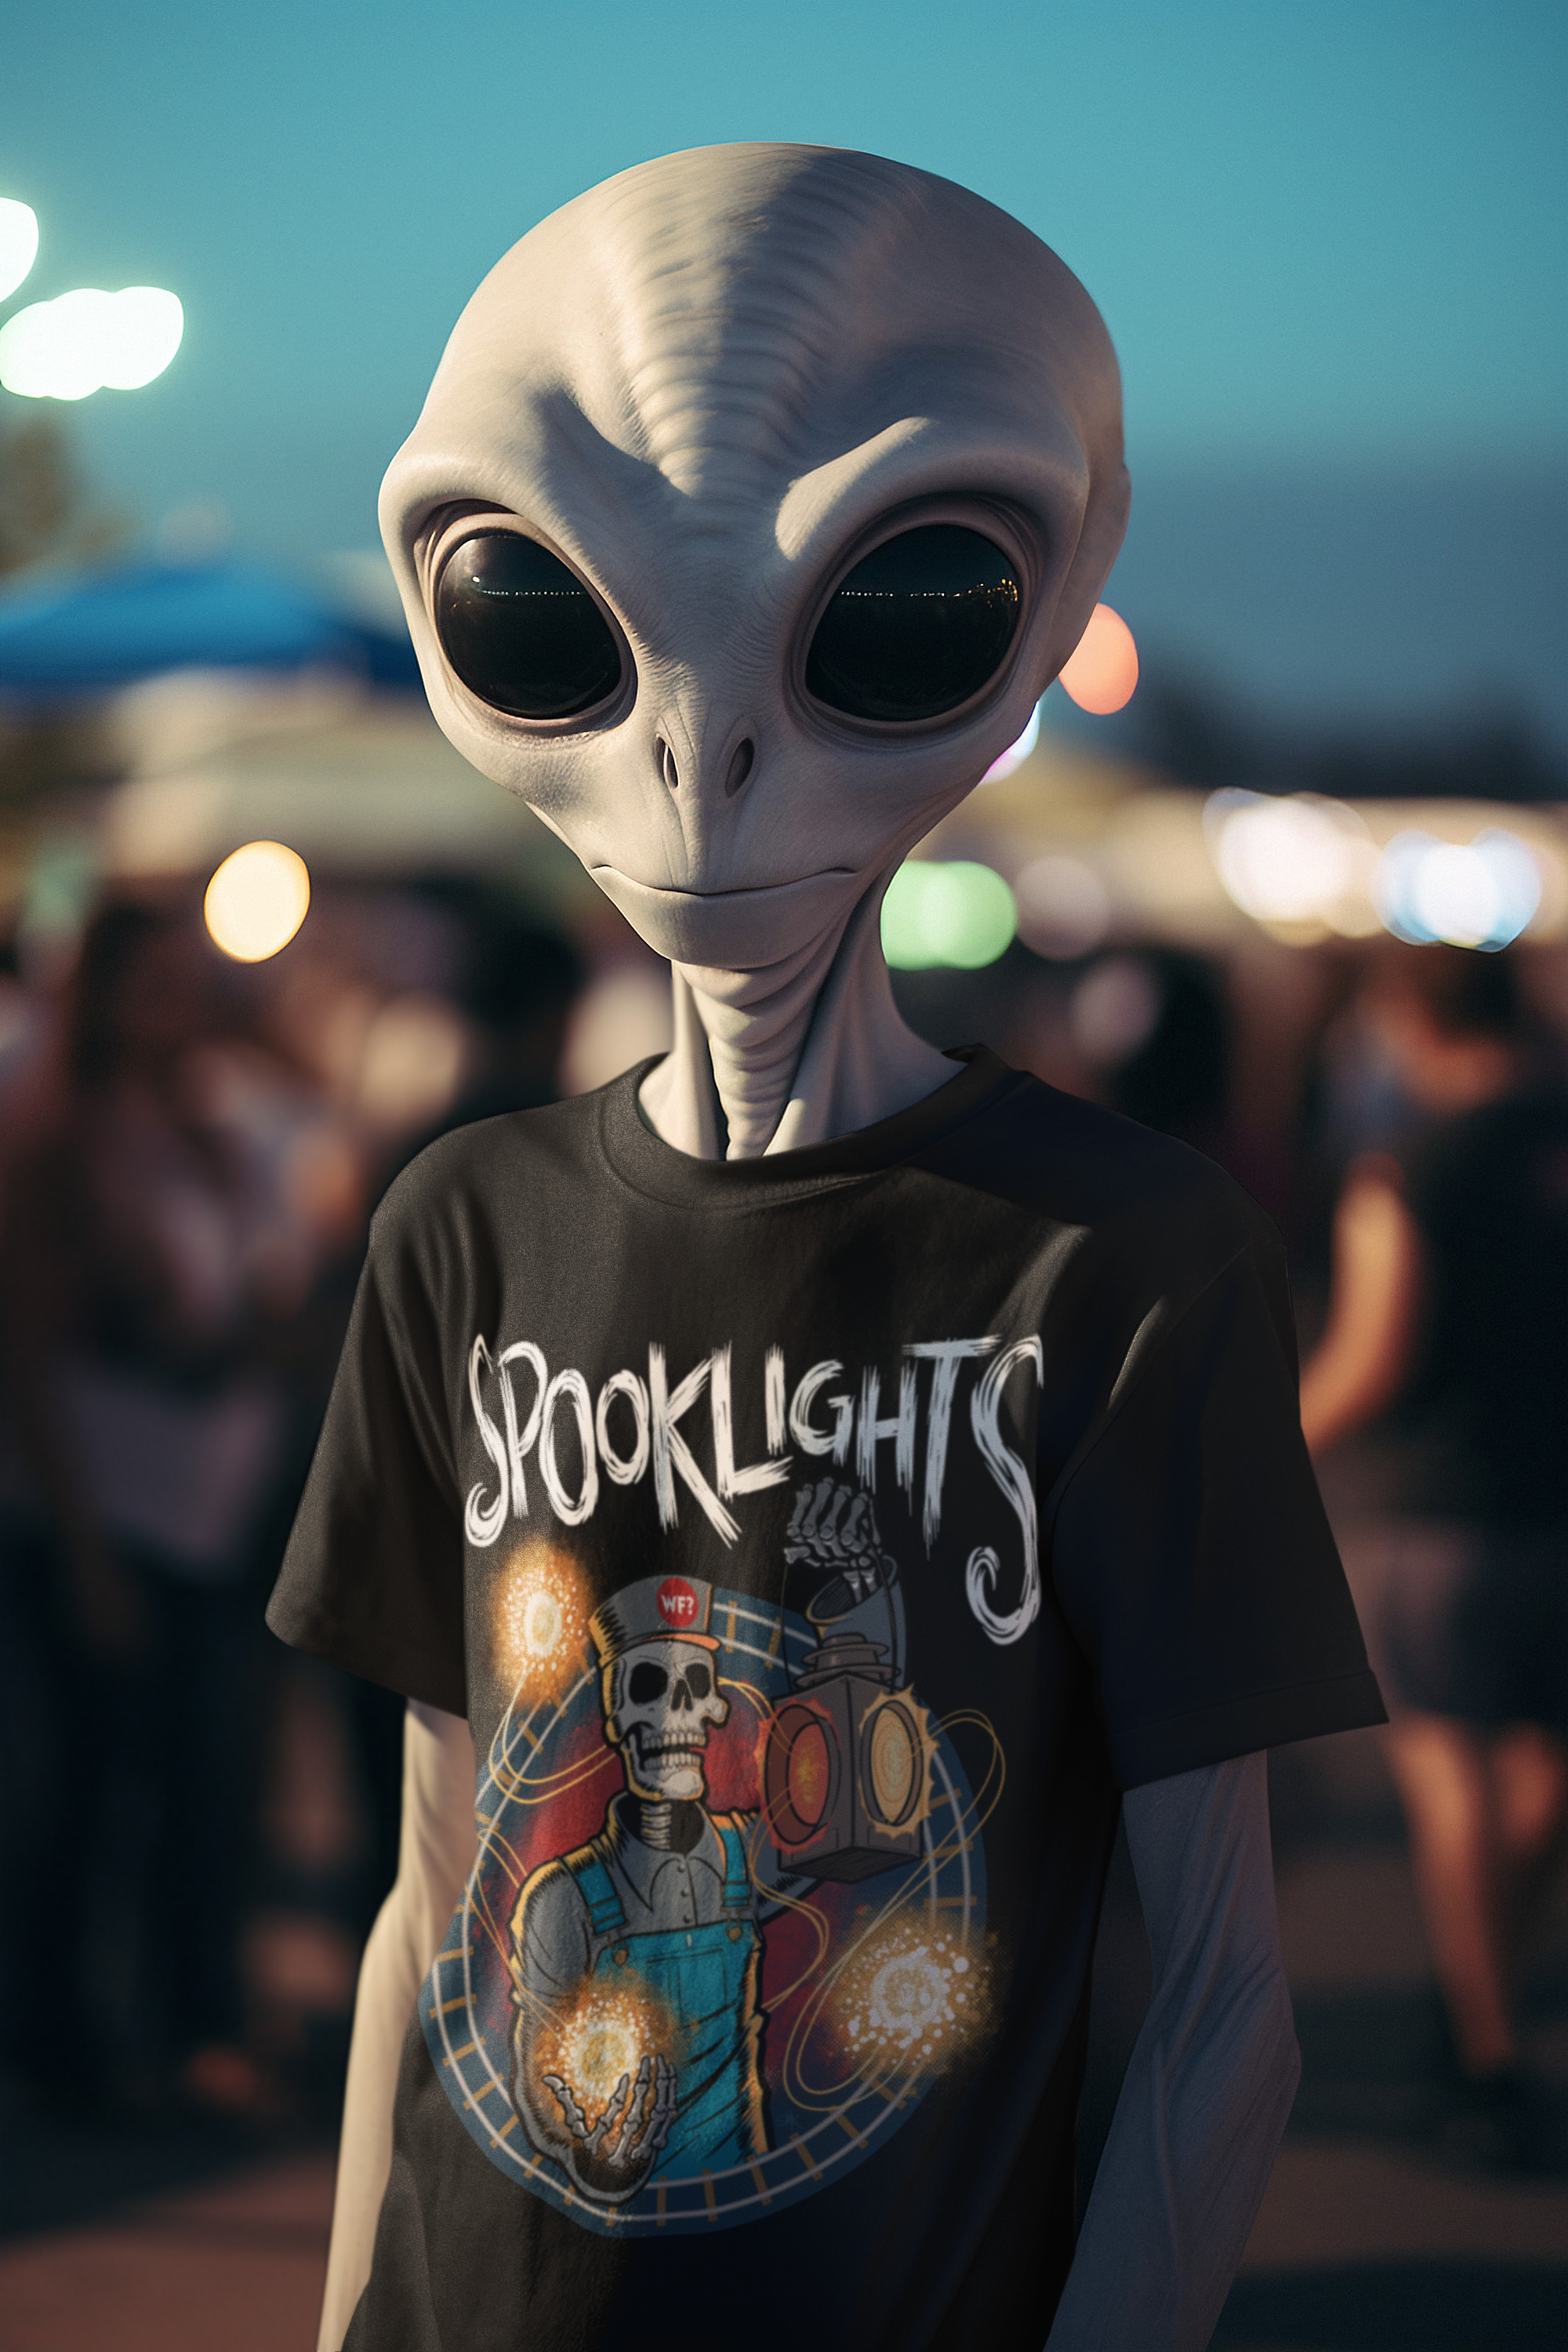 9/7 Spooklights Limited T-Shirt